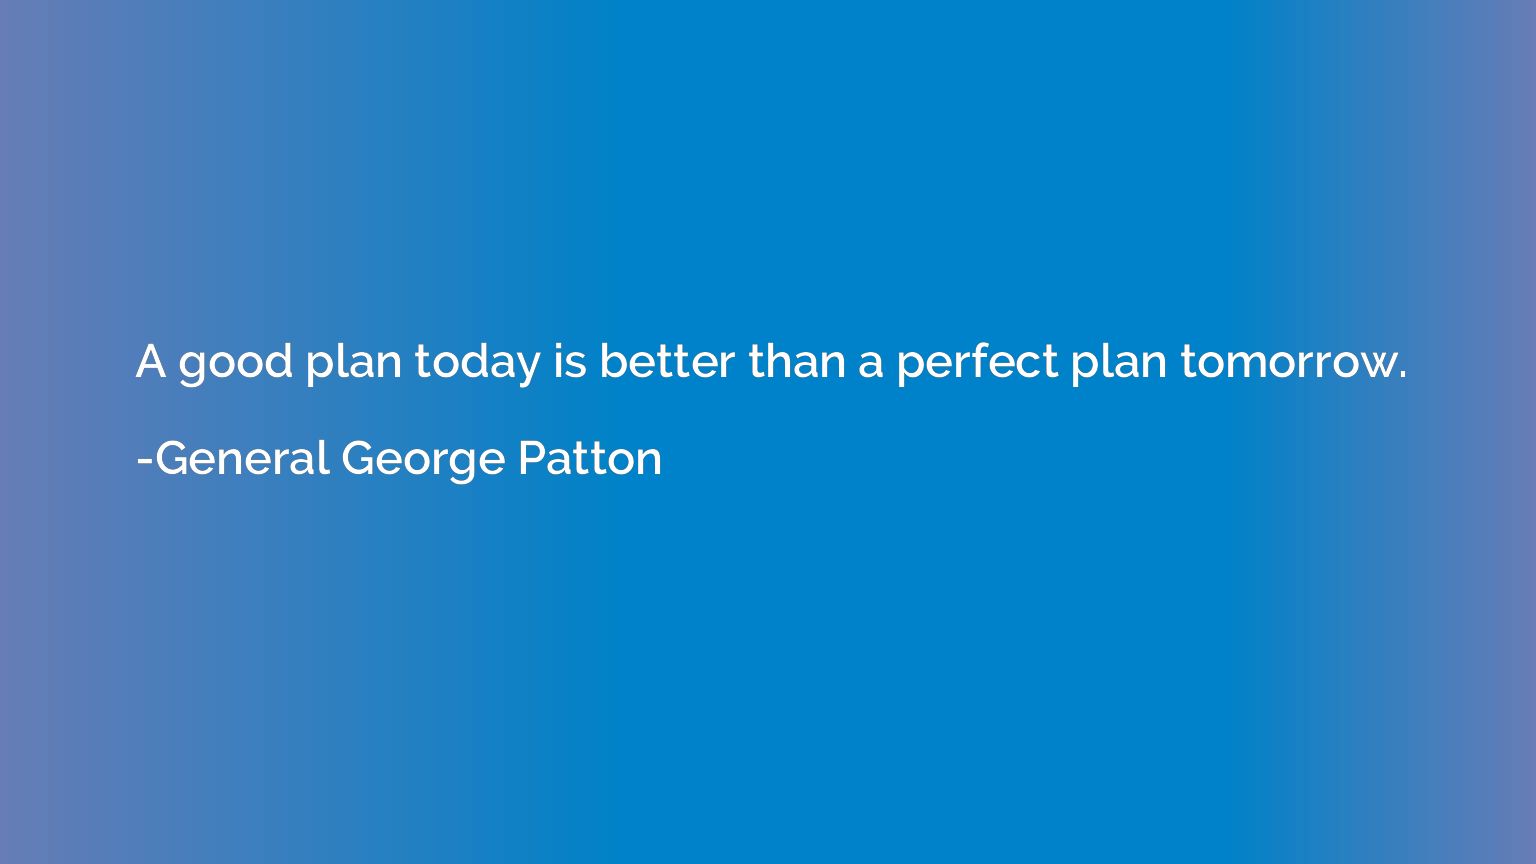 A good plan today is better than a perfect plan tomorrow.